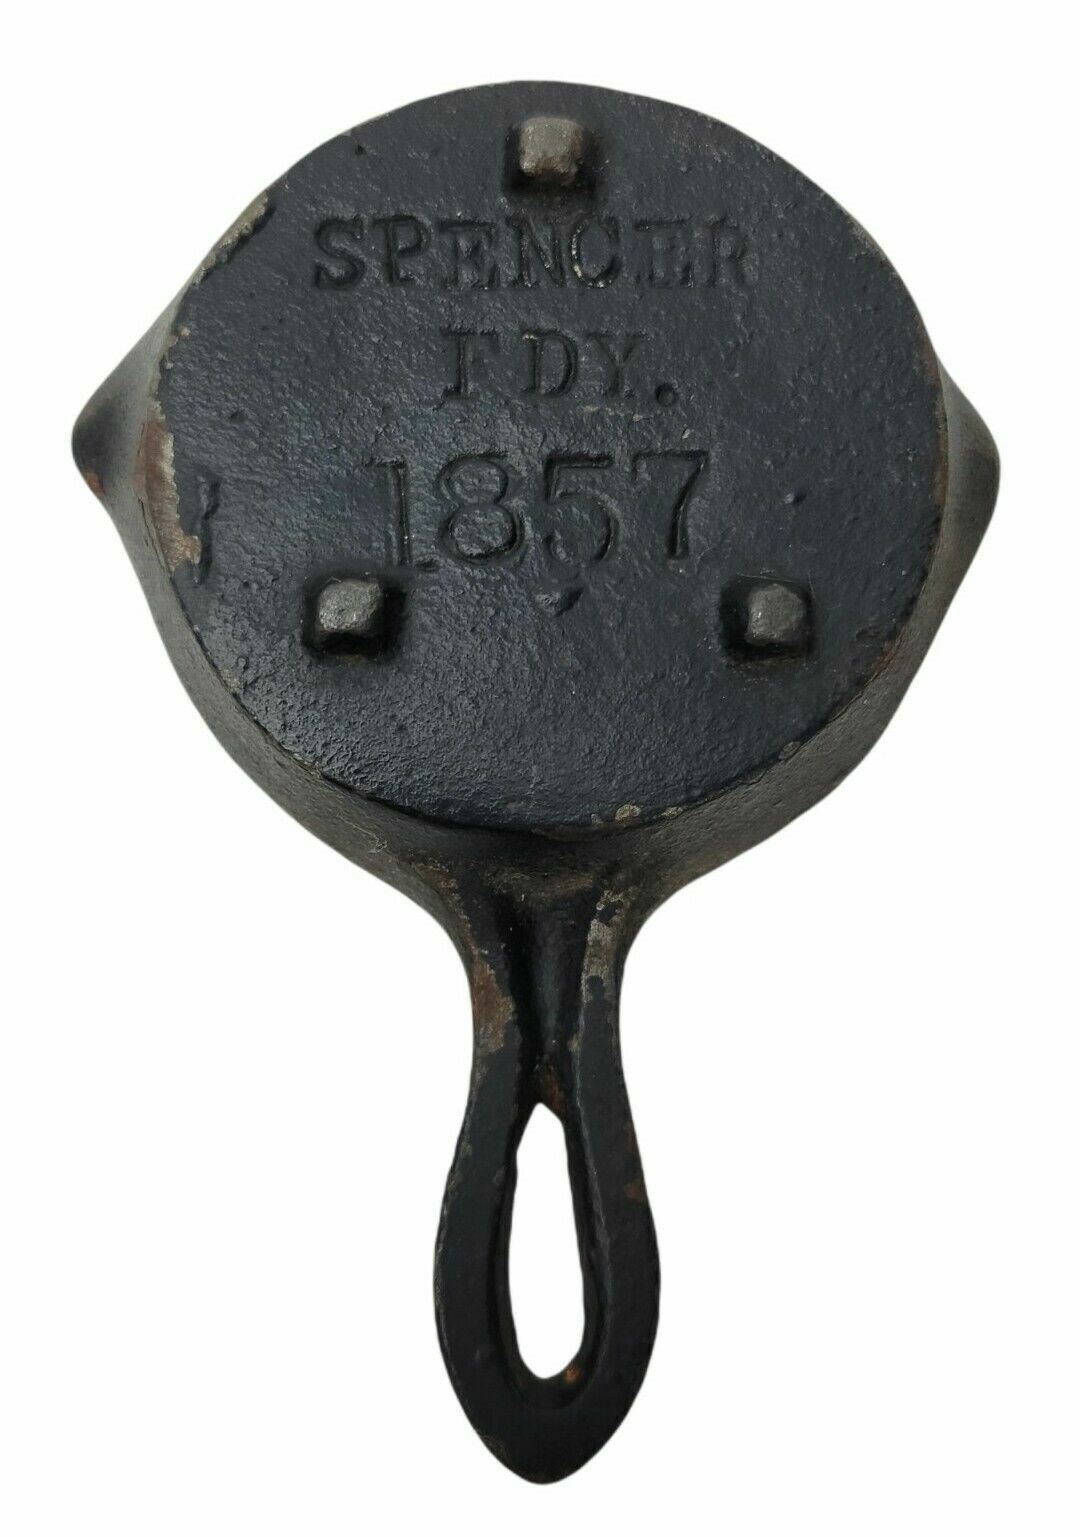 Spencer Foundry 1857 Miniature Cast Iron Skillet Pan Salesman Sample Small Toy